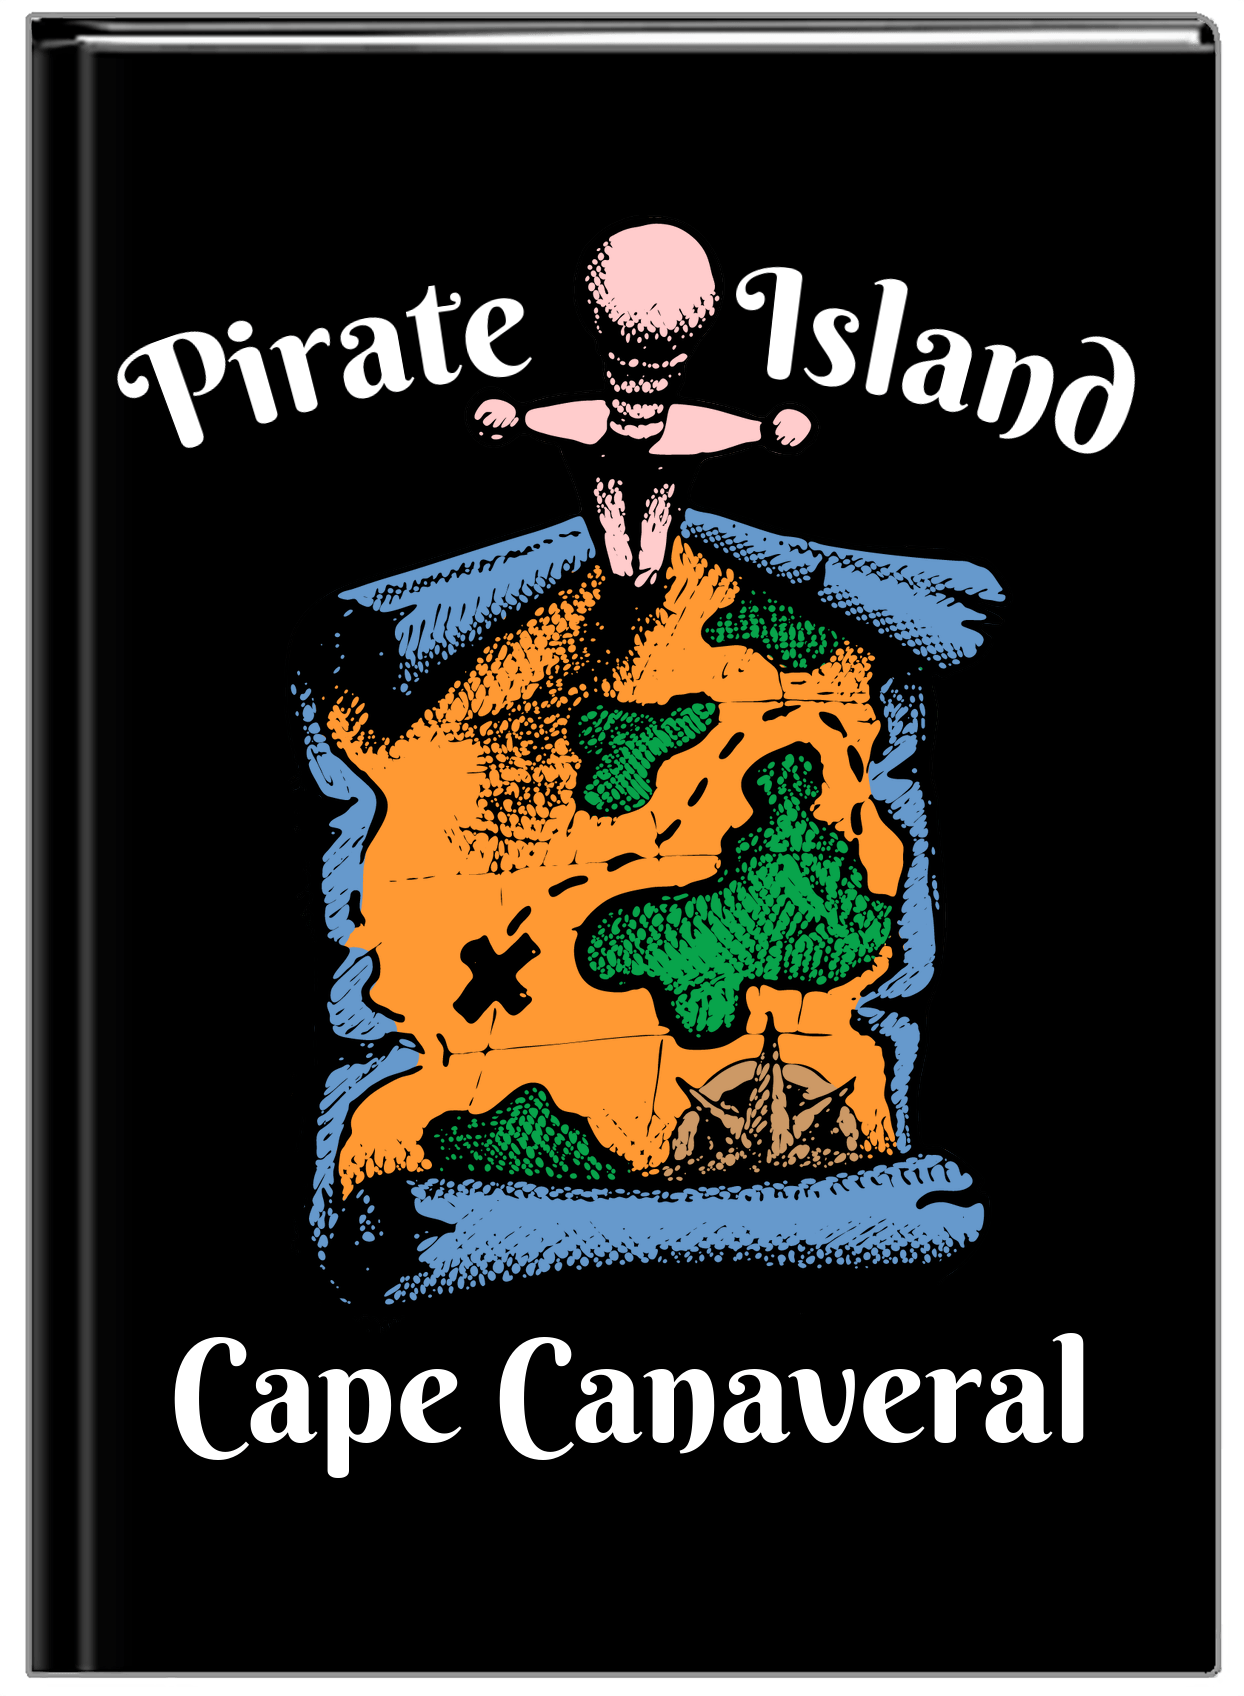 Personalized Pirates Journal - Pirate Island - Front View